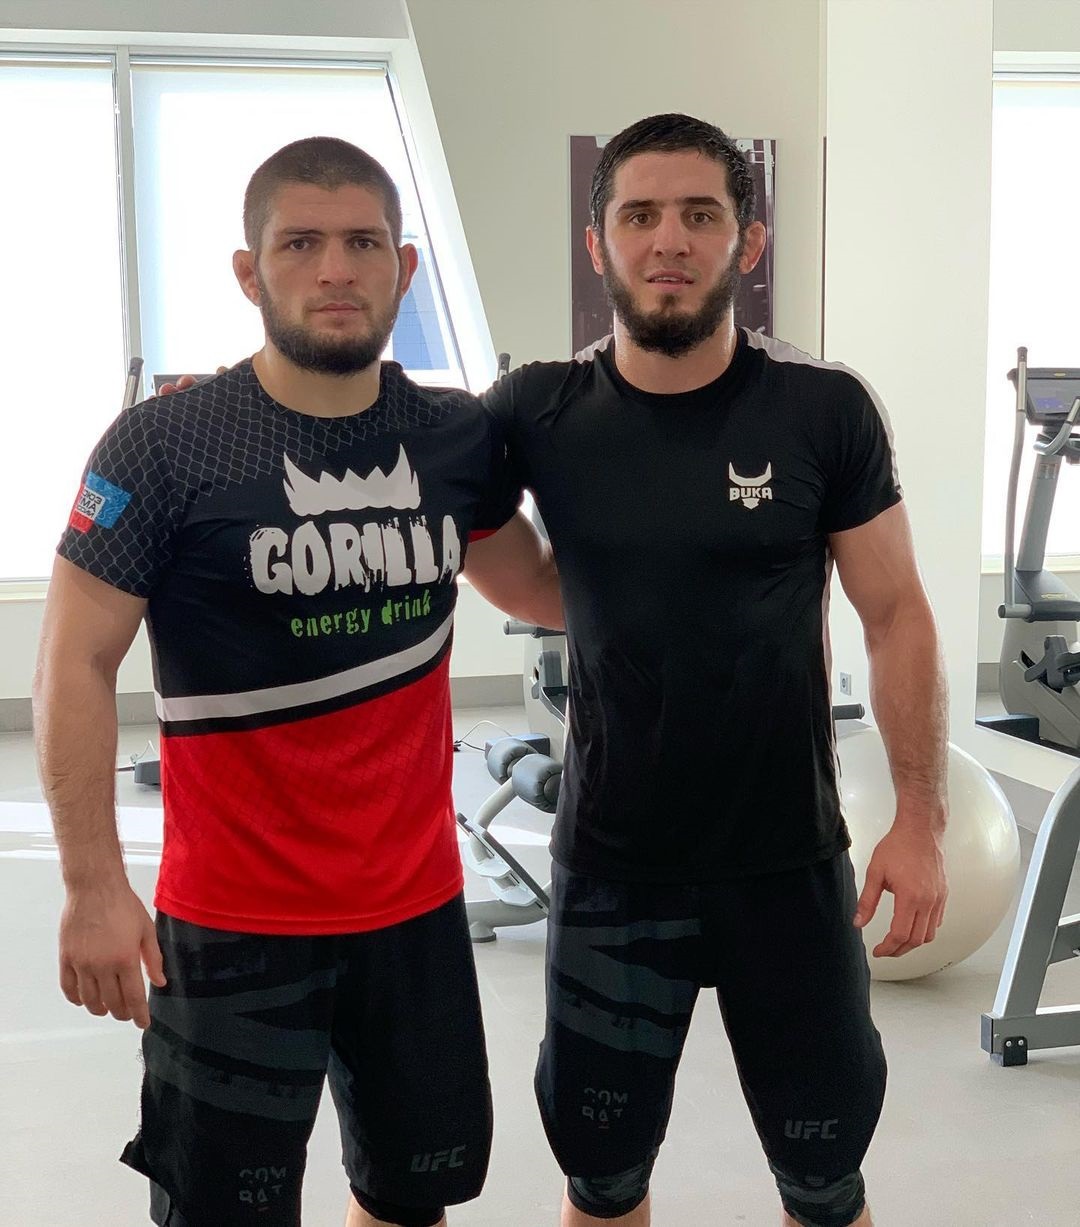 Khabib suggests Islam Makhachev as a better UFC fighter than he and asks UFC for Charles Oliveira to fight him